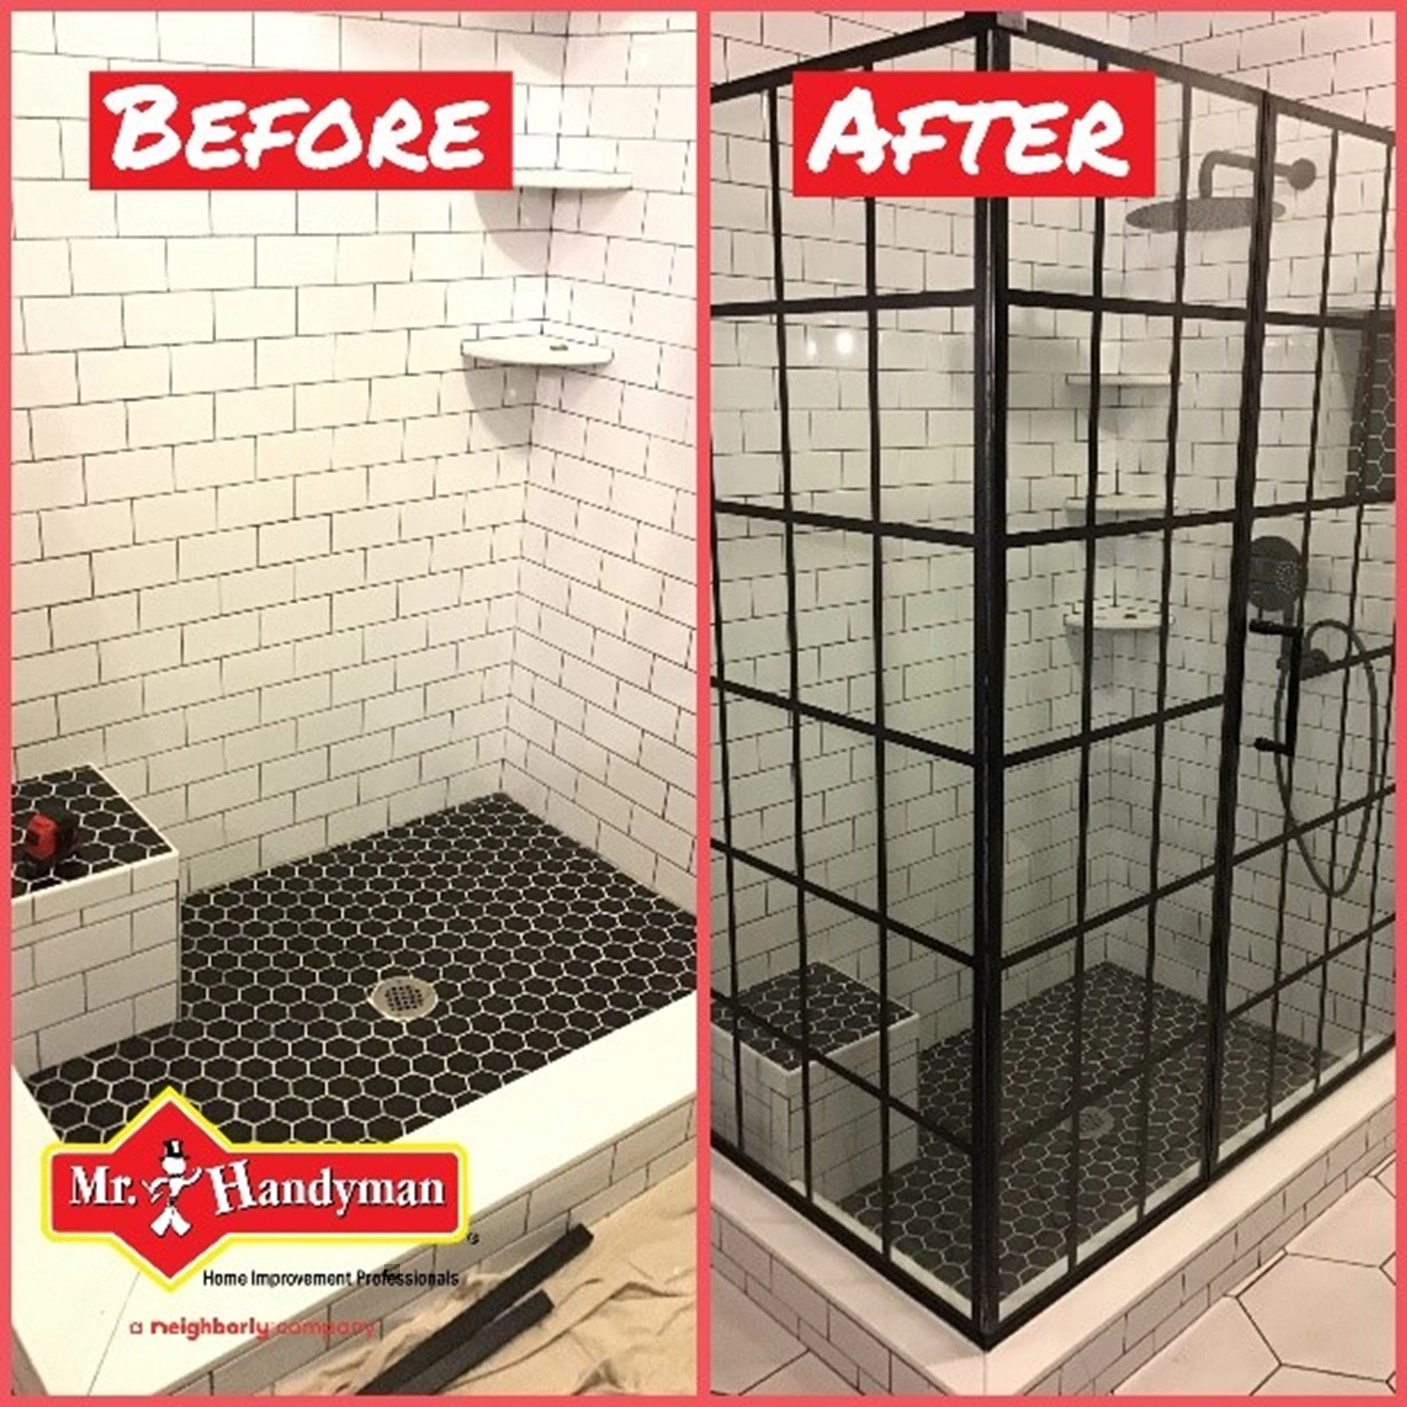 A tiled shower before and after a new glass shower enclosure and shower door have been installed by Mr. Handyman.